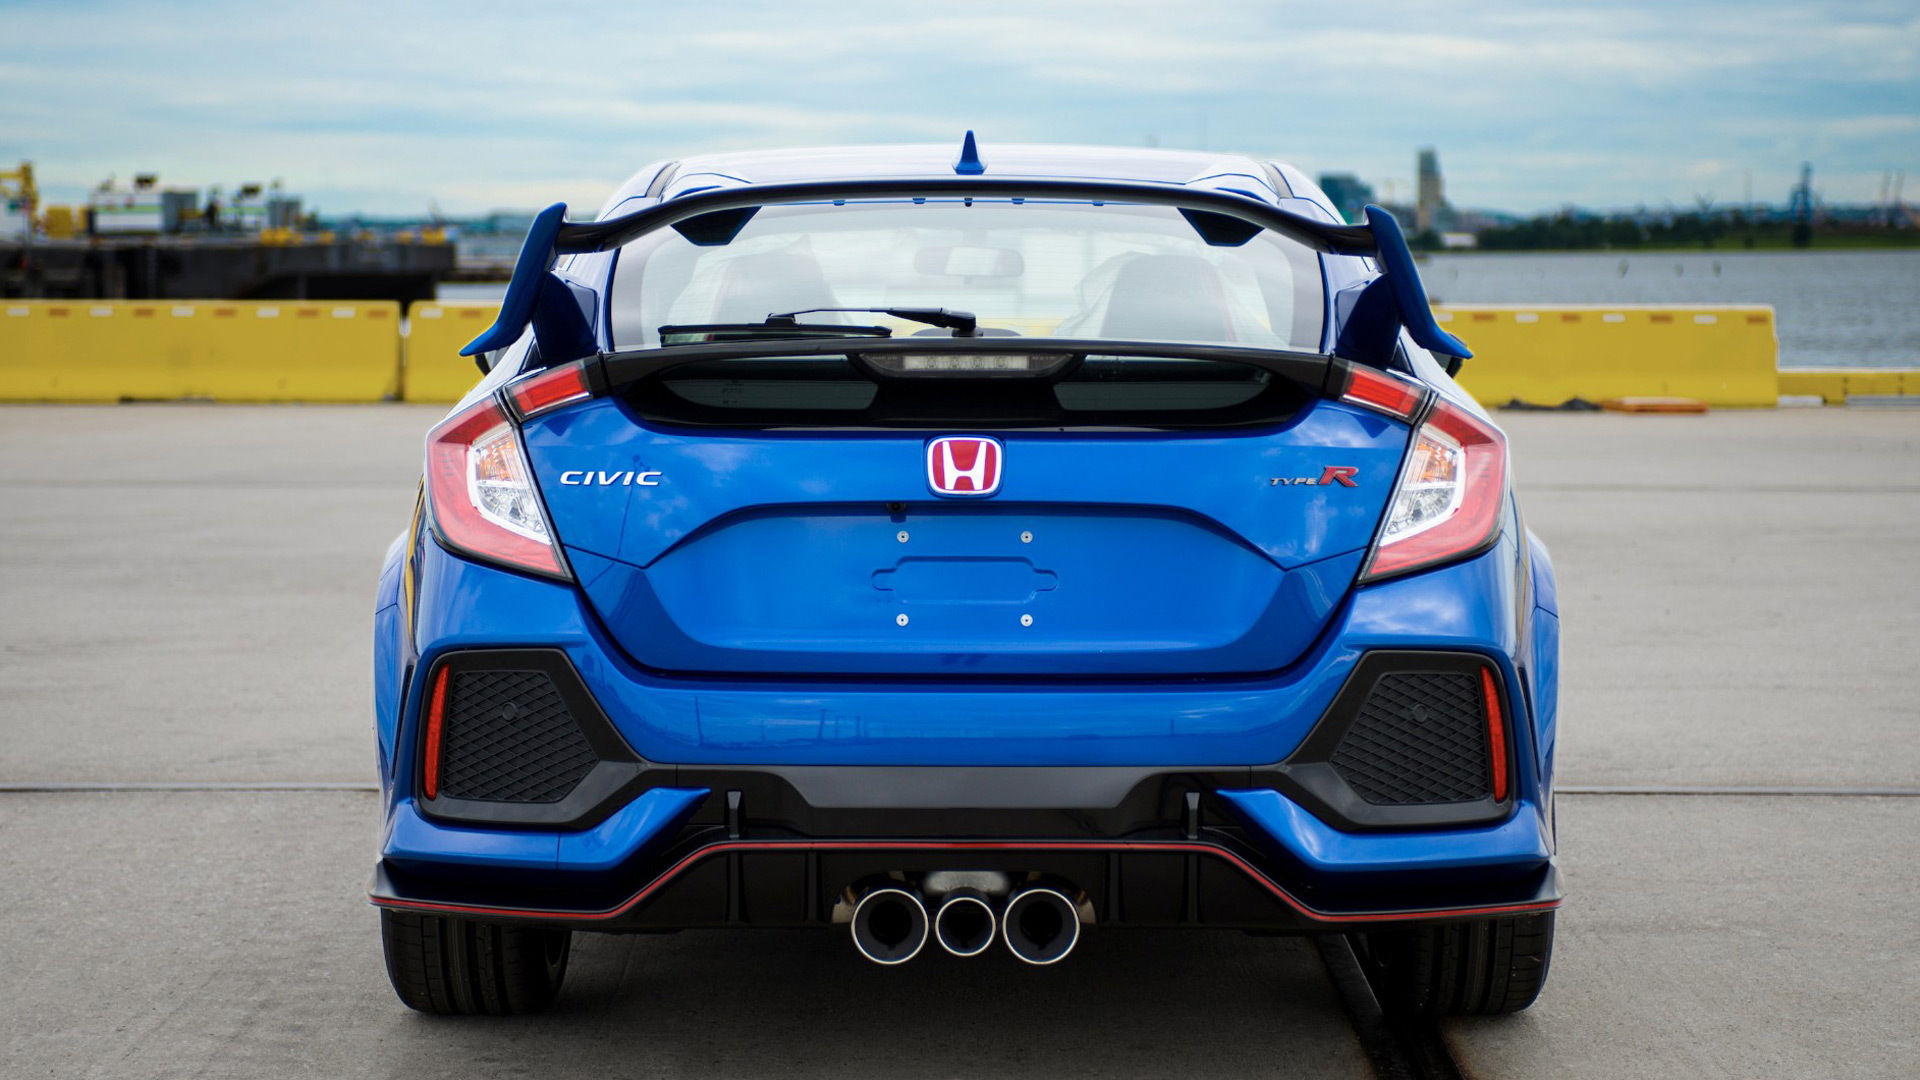 2017 Honda Civic Type R with VIN ending in 001